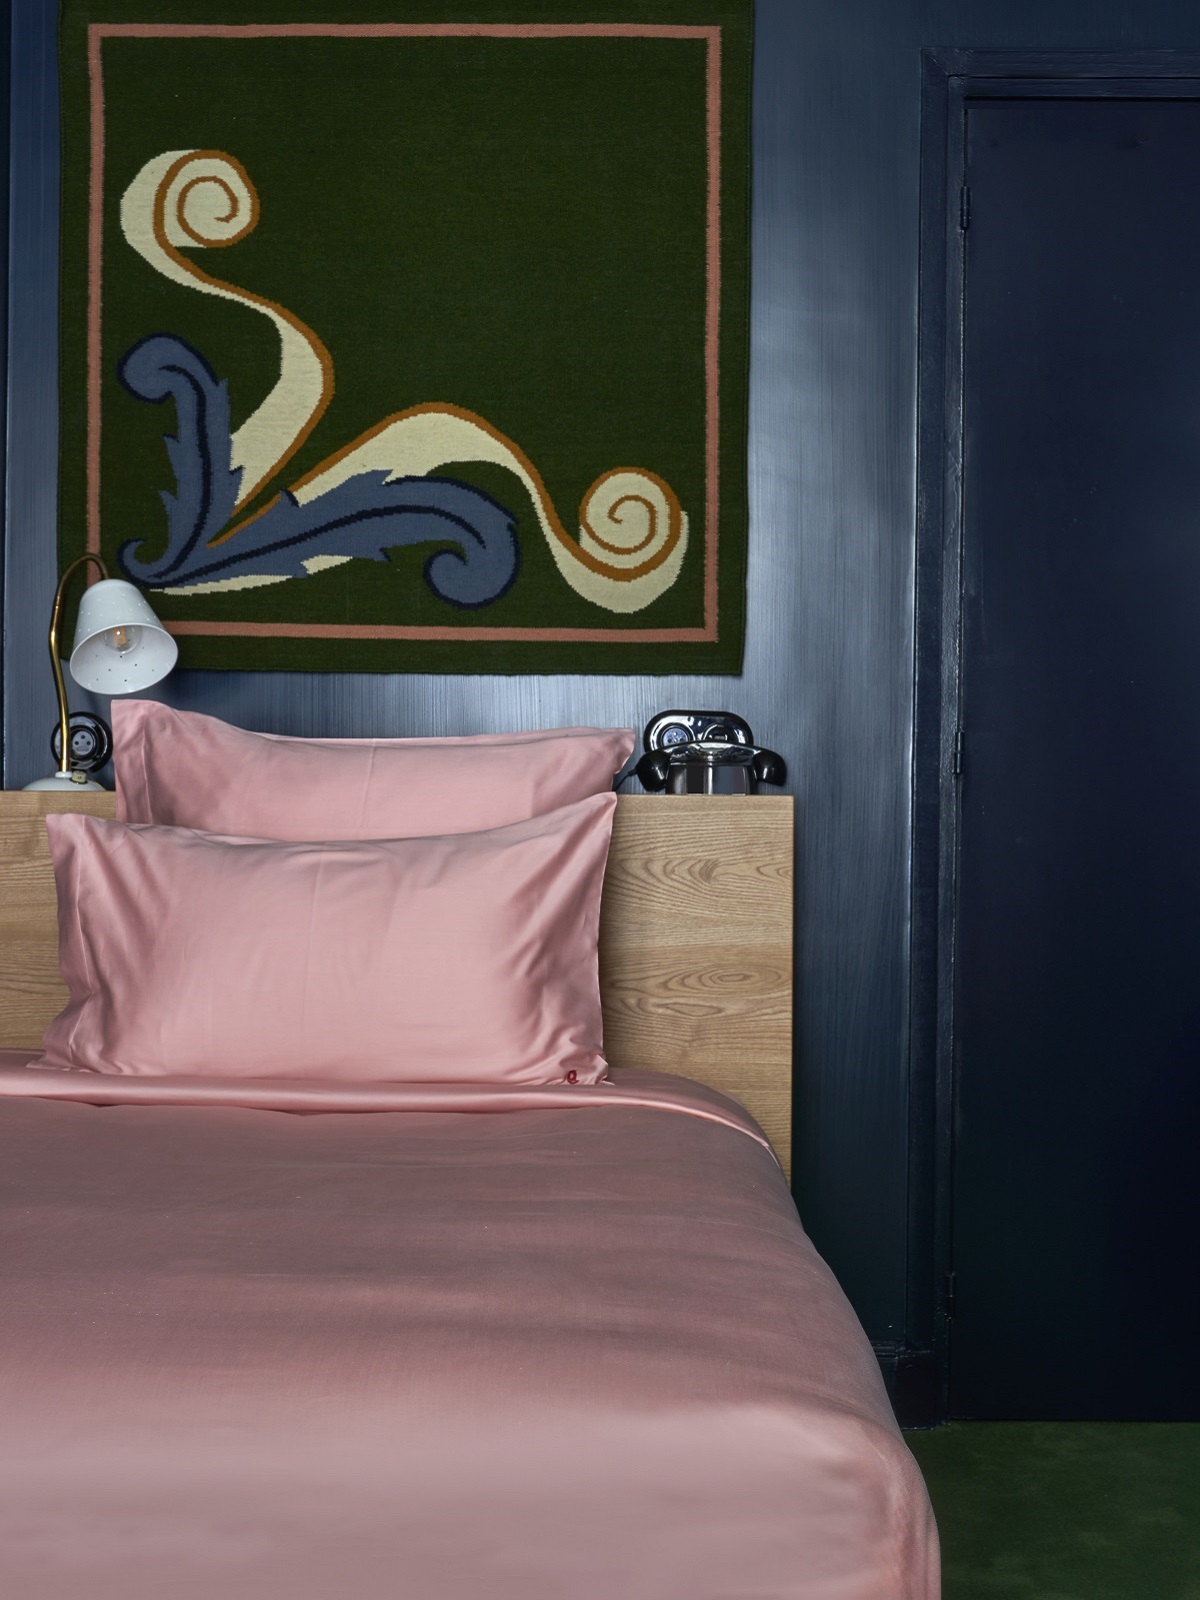 guestroom detail of pink bed linen, blue wall and patterned headboard